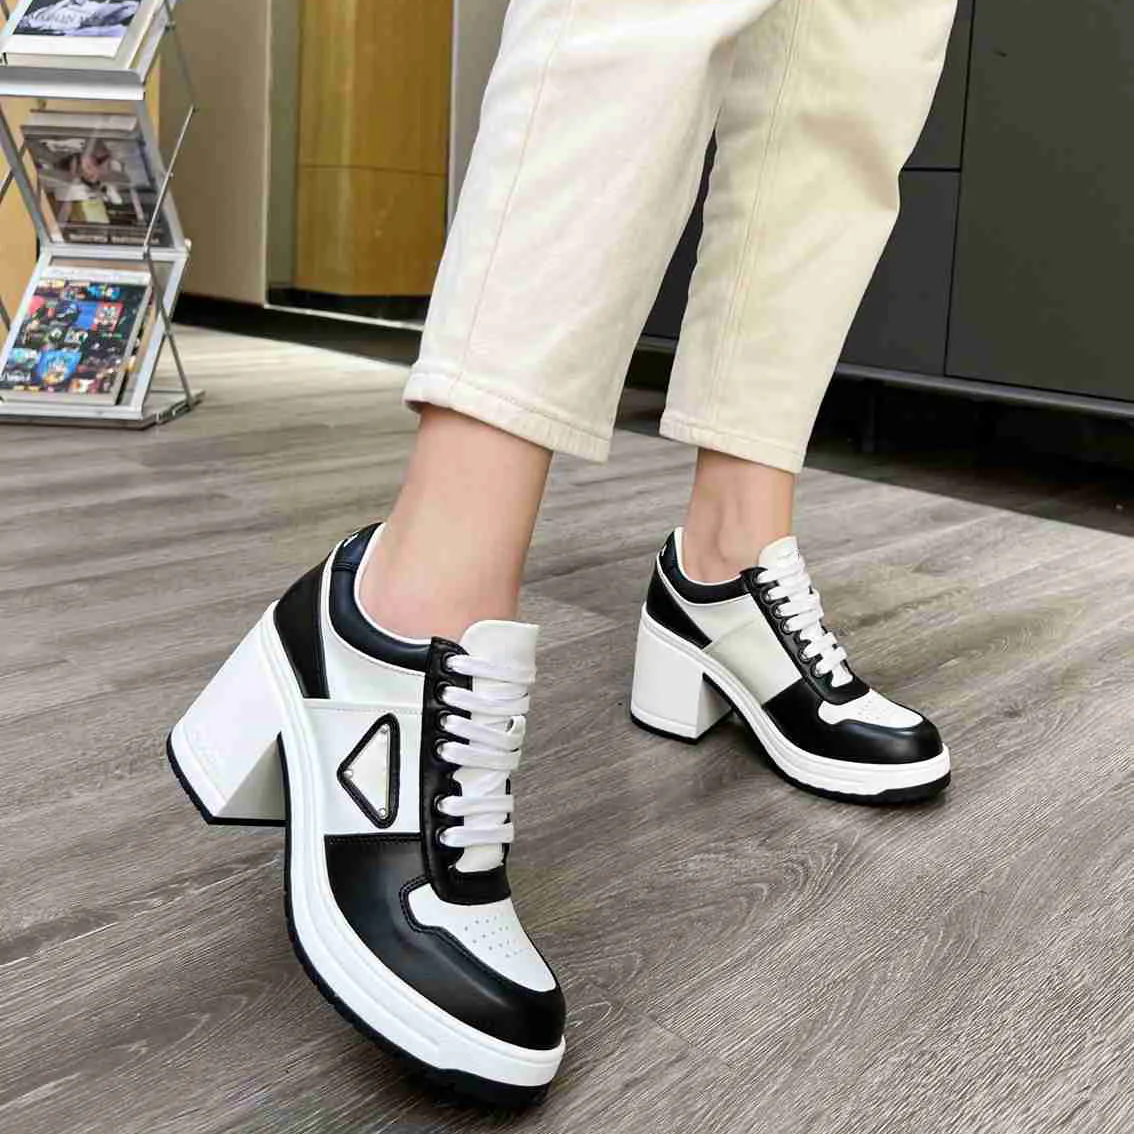 Latest Ladies Dress Women Shoes Designs High Heel Pumps Elegant Women Casual  Shoes Luxury Ornament - China Walking Style Shoe and Casual Shoes price |  Made-in-China.com